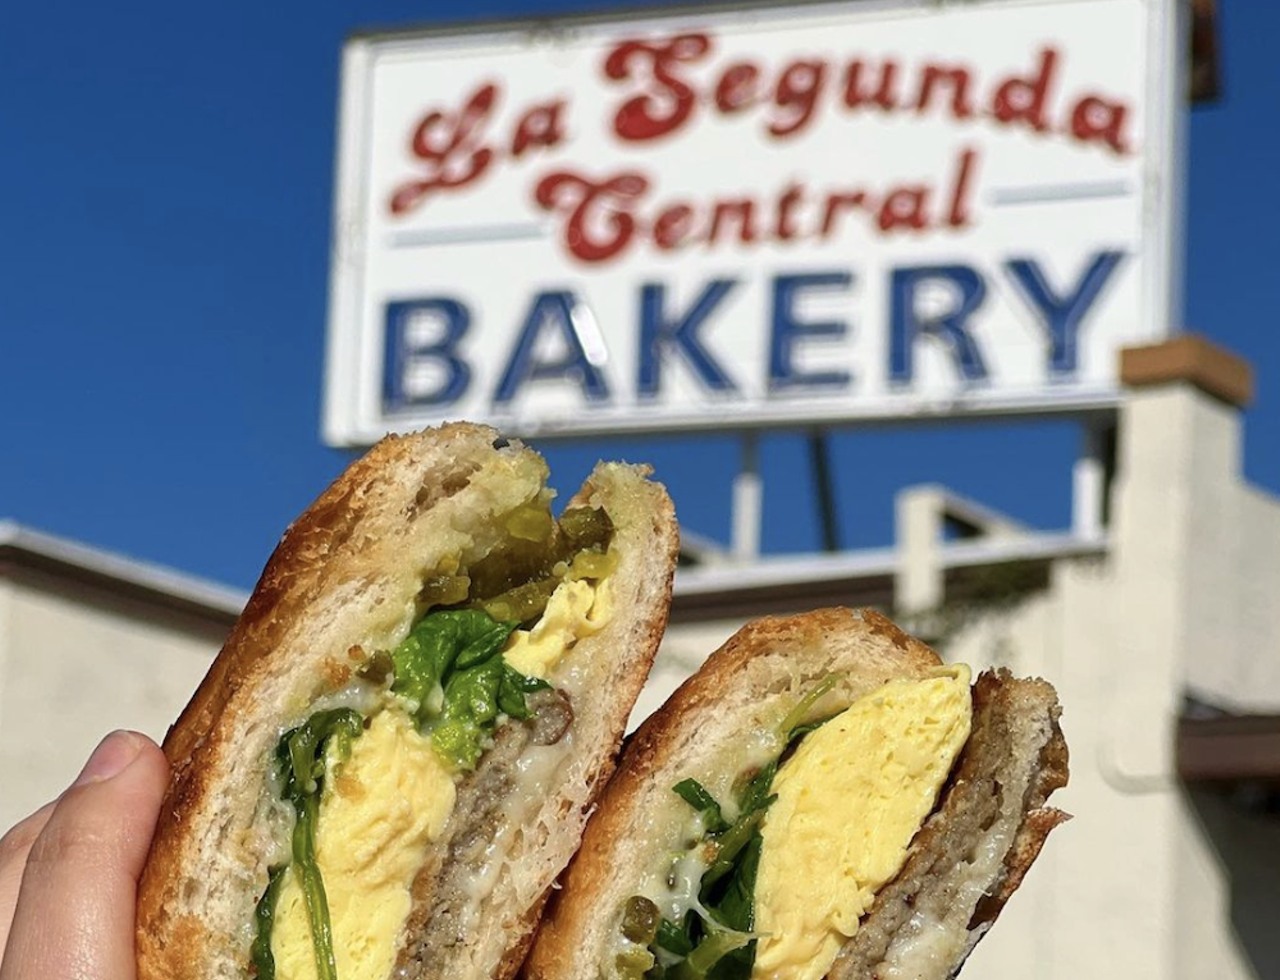 La Segunda Bakery
2424 4th S.t N, St. Petersburg, 727-388-4983
A taste of Ybor City culture makes its way to Pinellas when this Tampa staple starts serving Cuban staples like guava and cheese pastelitos and Cuban sandwiches to the beachside community. 
Photo via La Segunda Bakery/Instagram